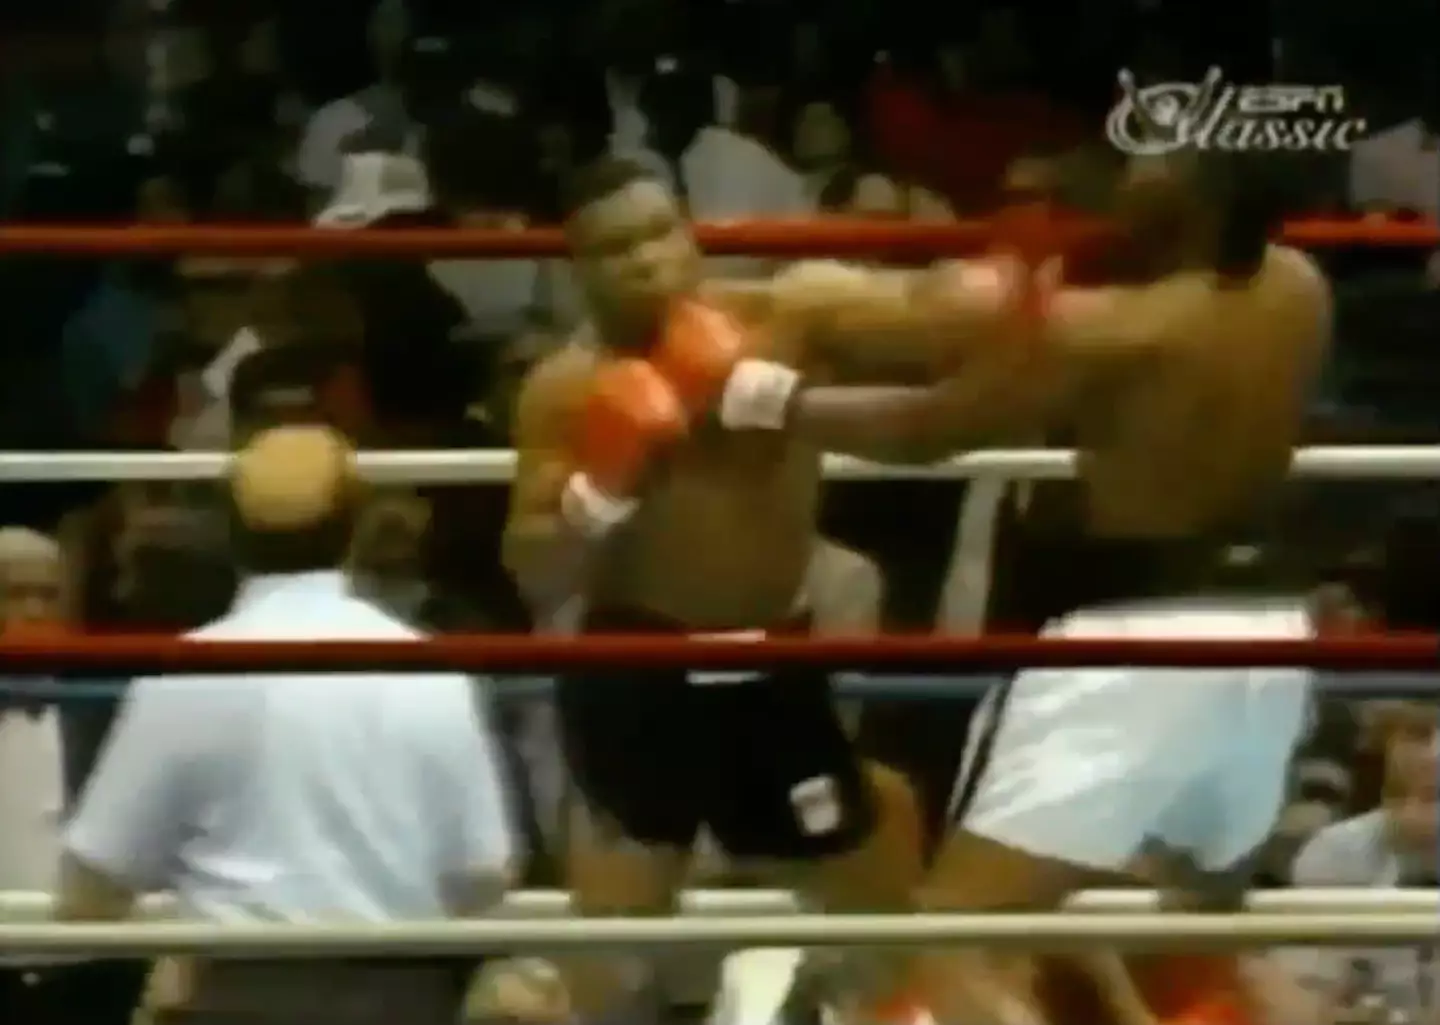 Tyson lands the punch.